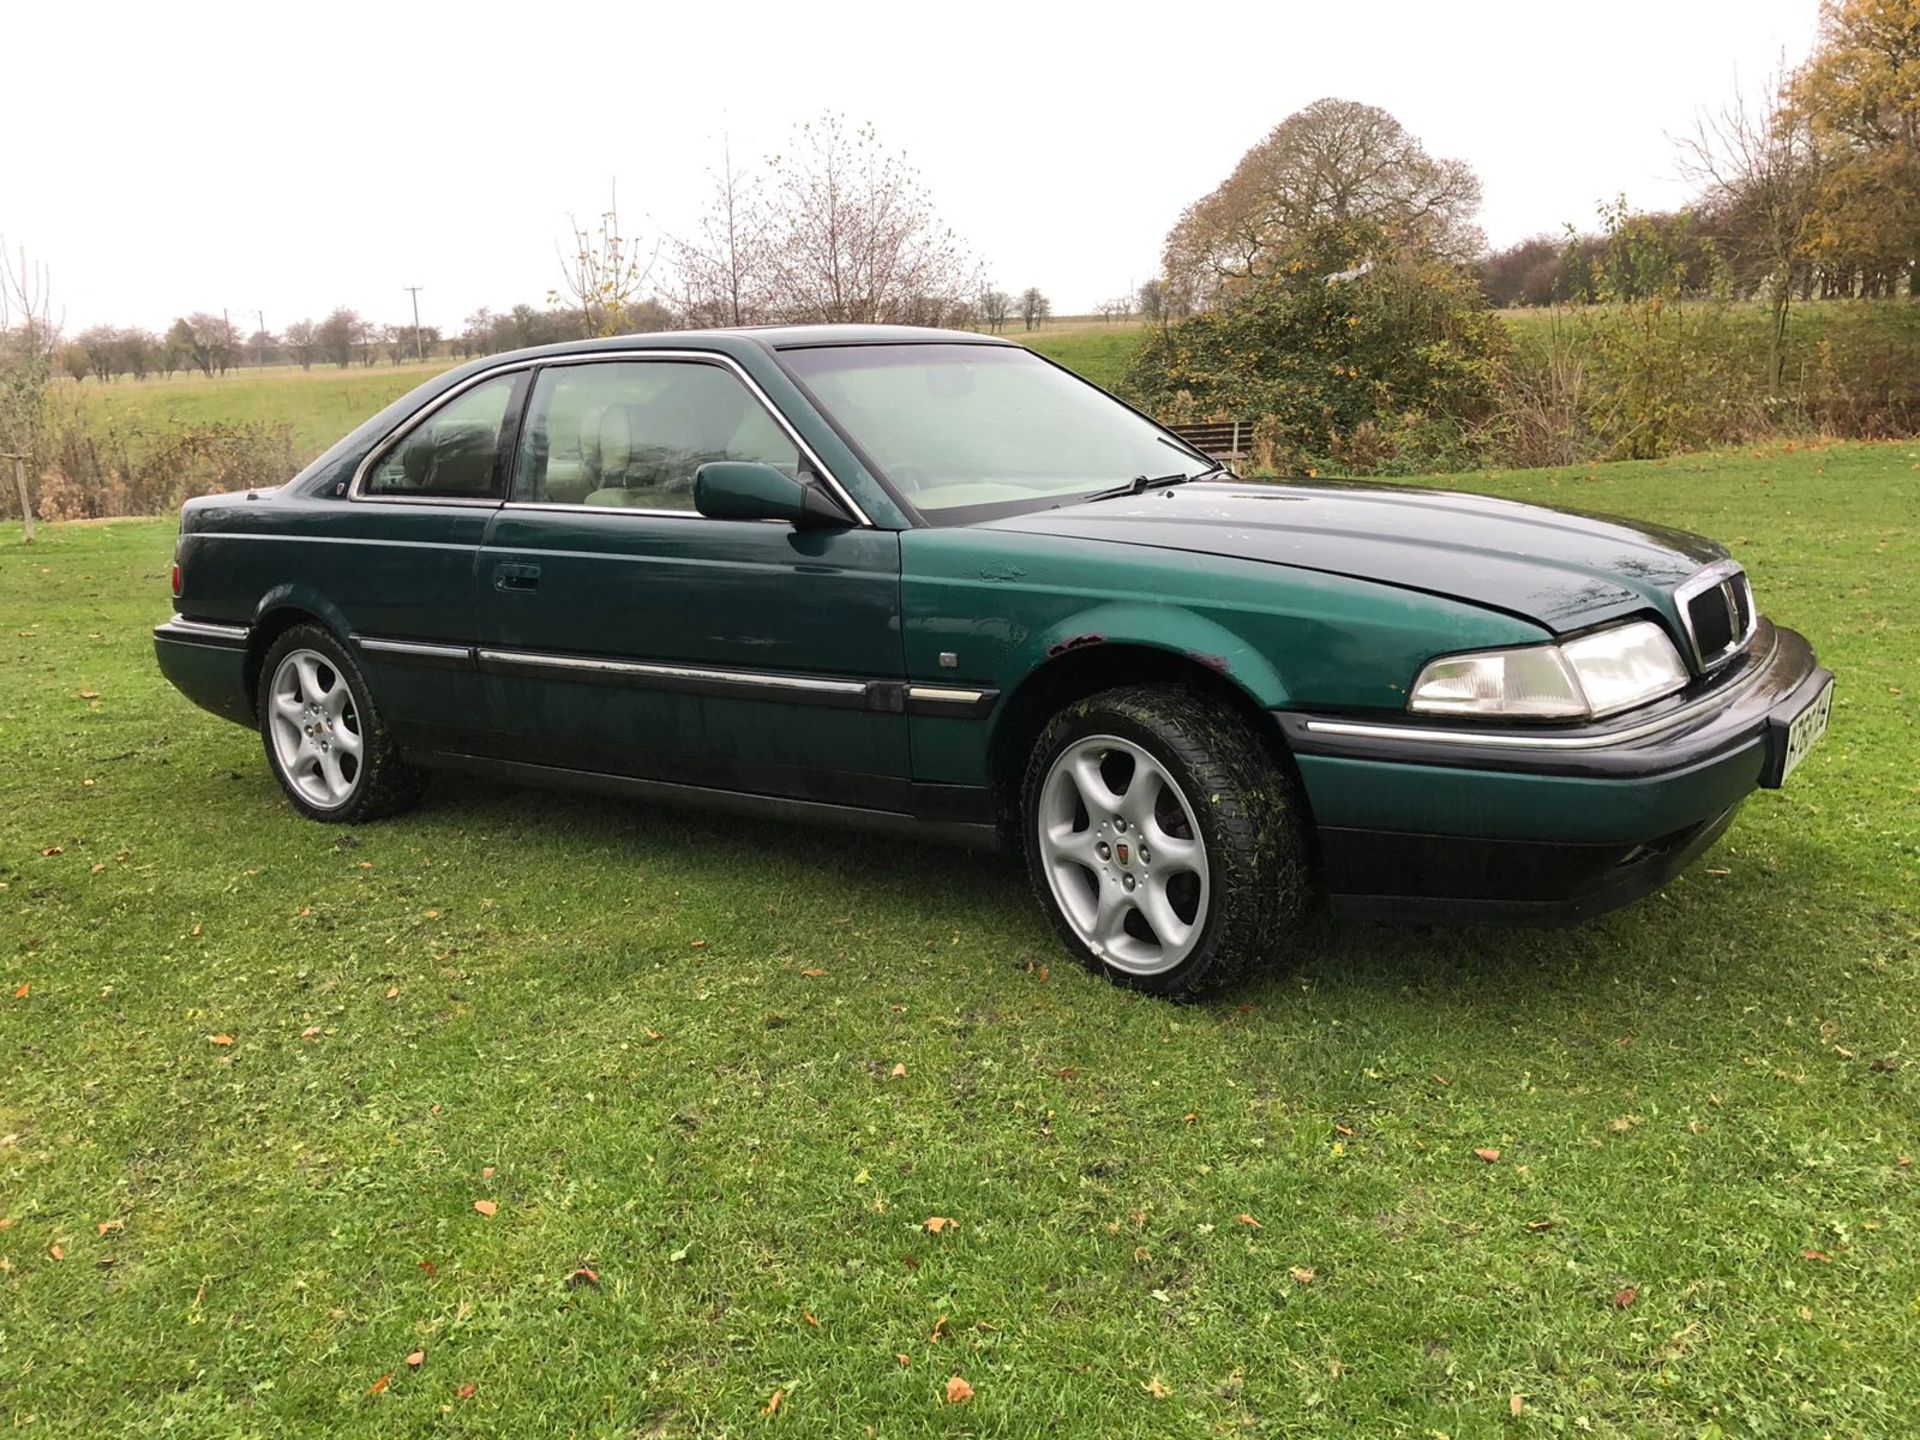 1997/R REG ROVER 825 STERLING COUPE 2.5 PETROL AUTOMATIC GREEN *NO VAT*